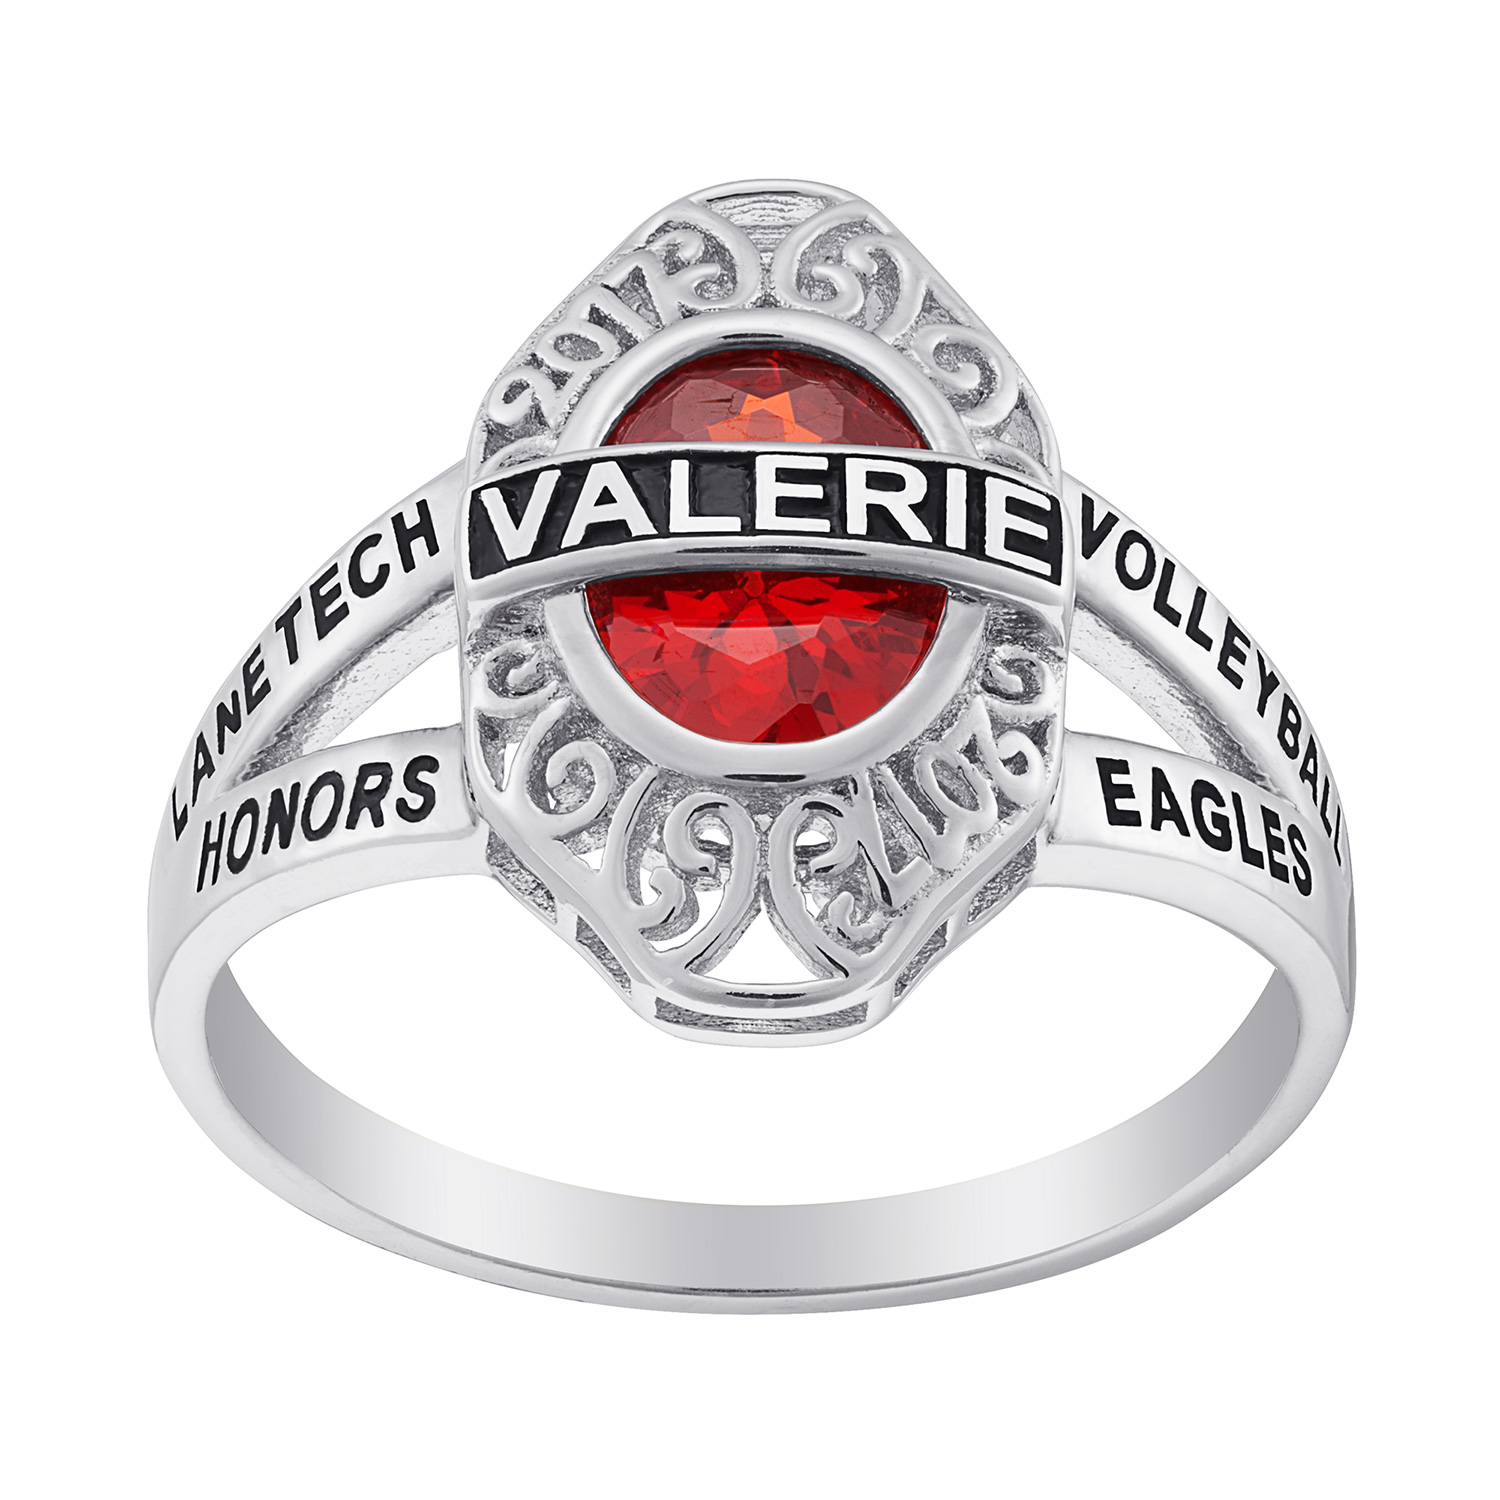 Sterling Silver Bridged Name Birthstone Class Ring with Filigree Hidden Year